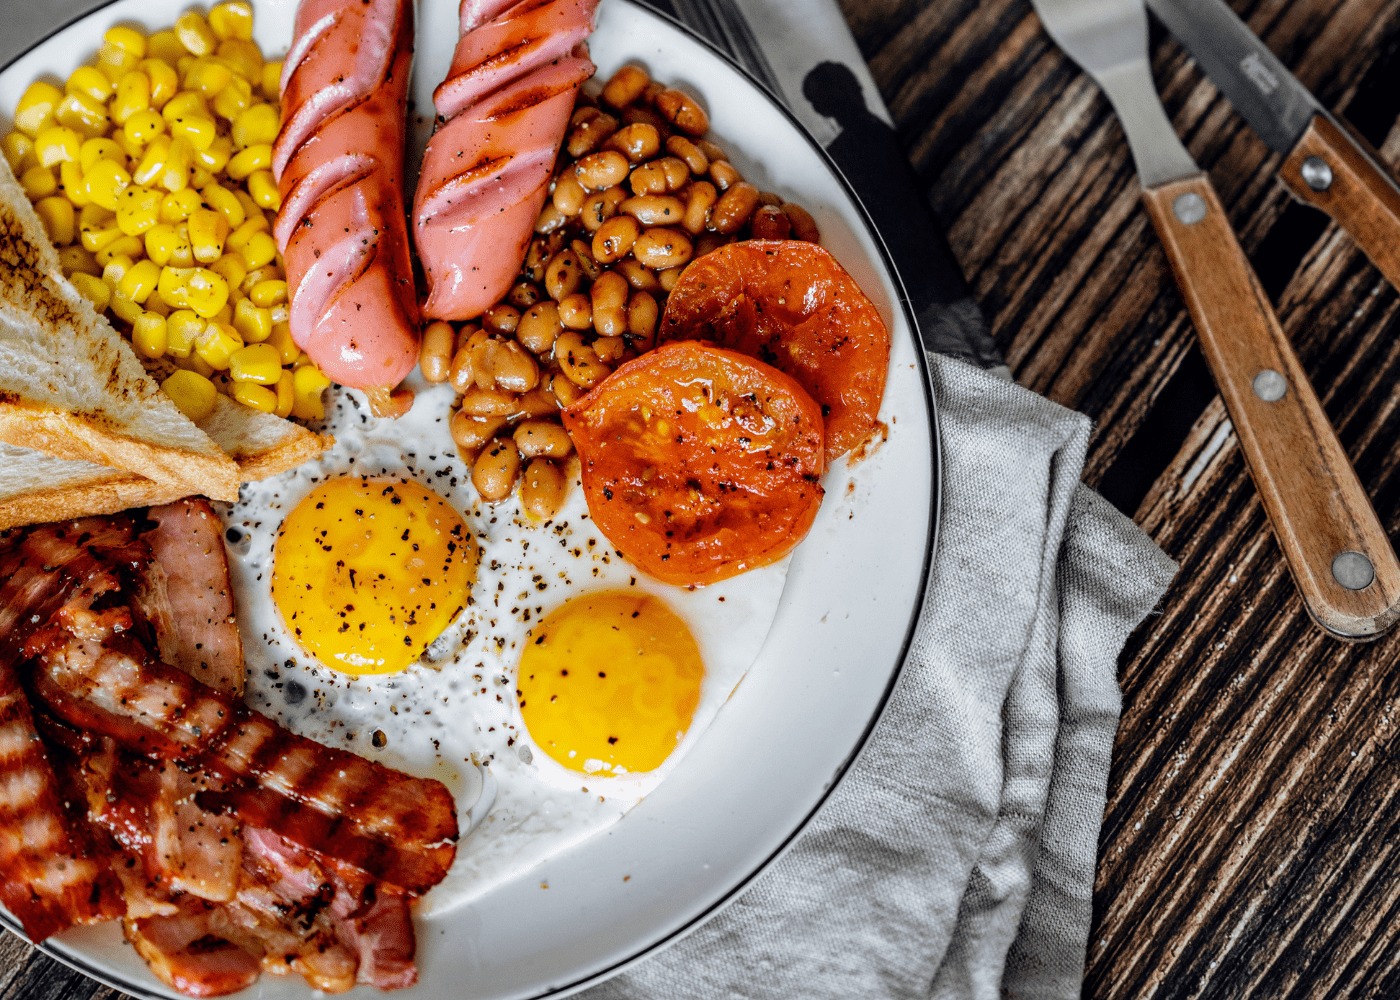 Plan a Trip to London If You Want to Know When You’ll Meet Your Soulmate ❤️ Full English